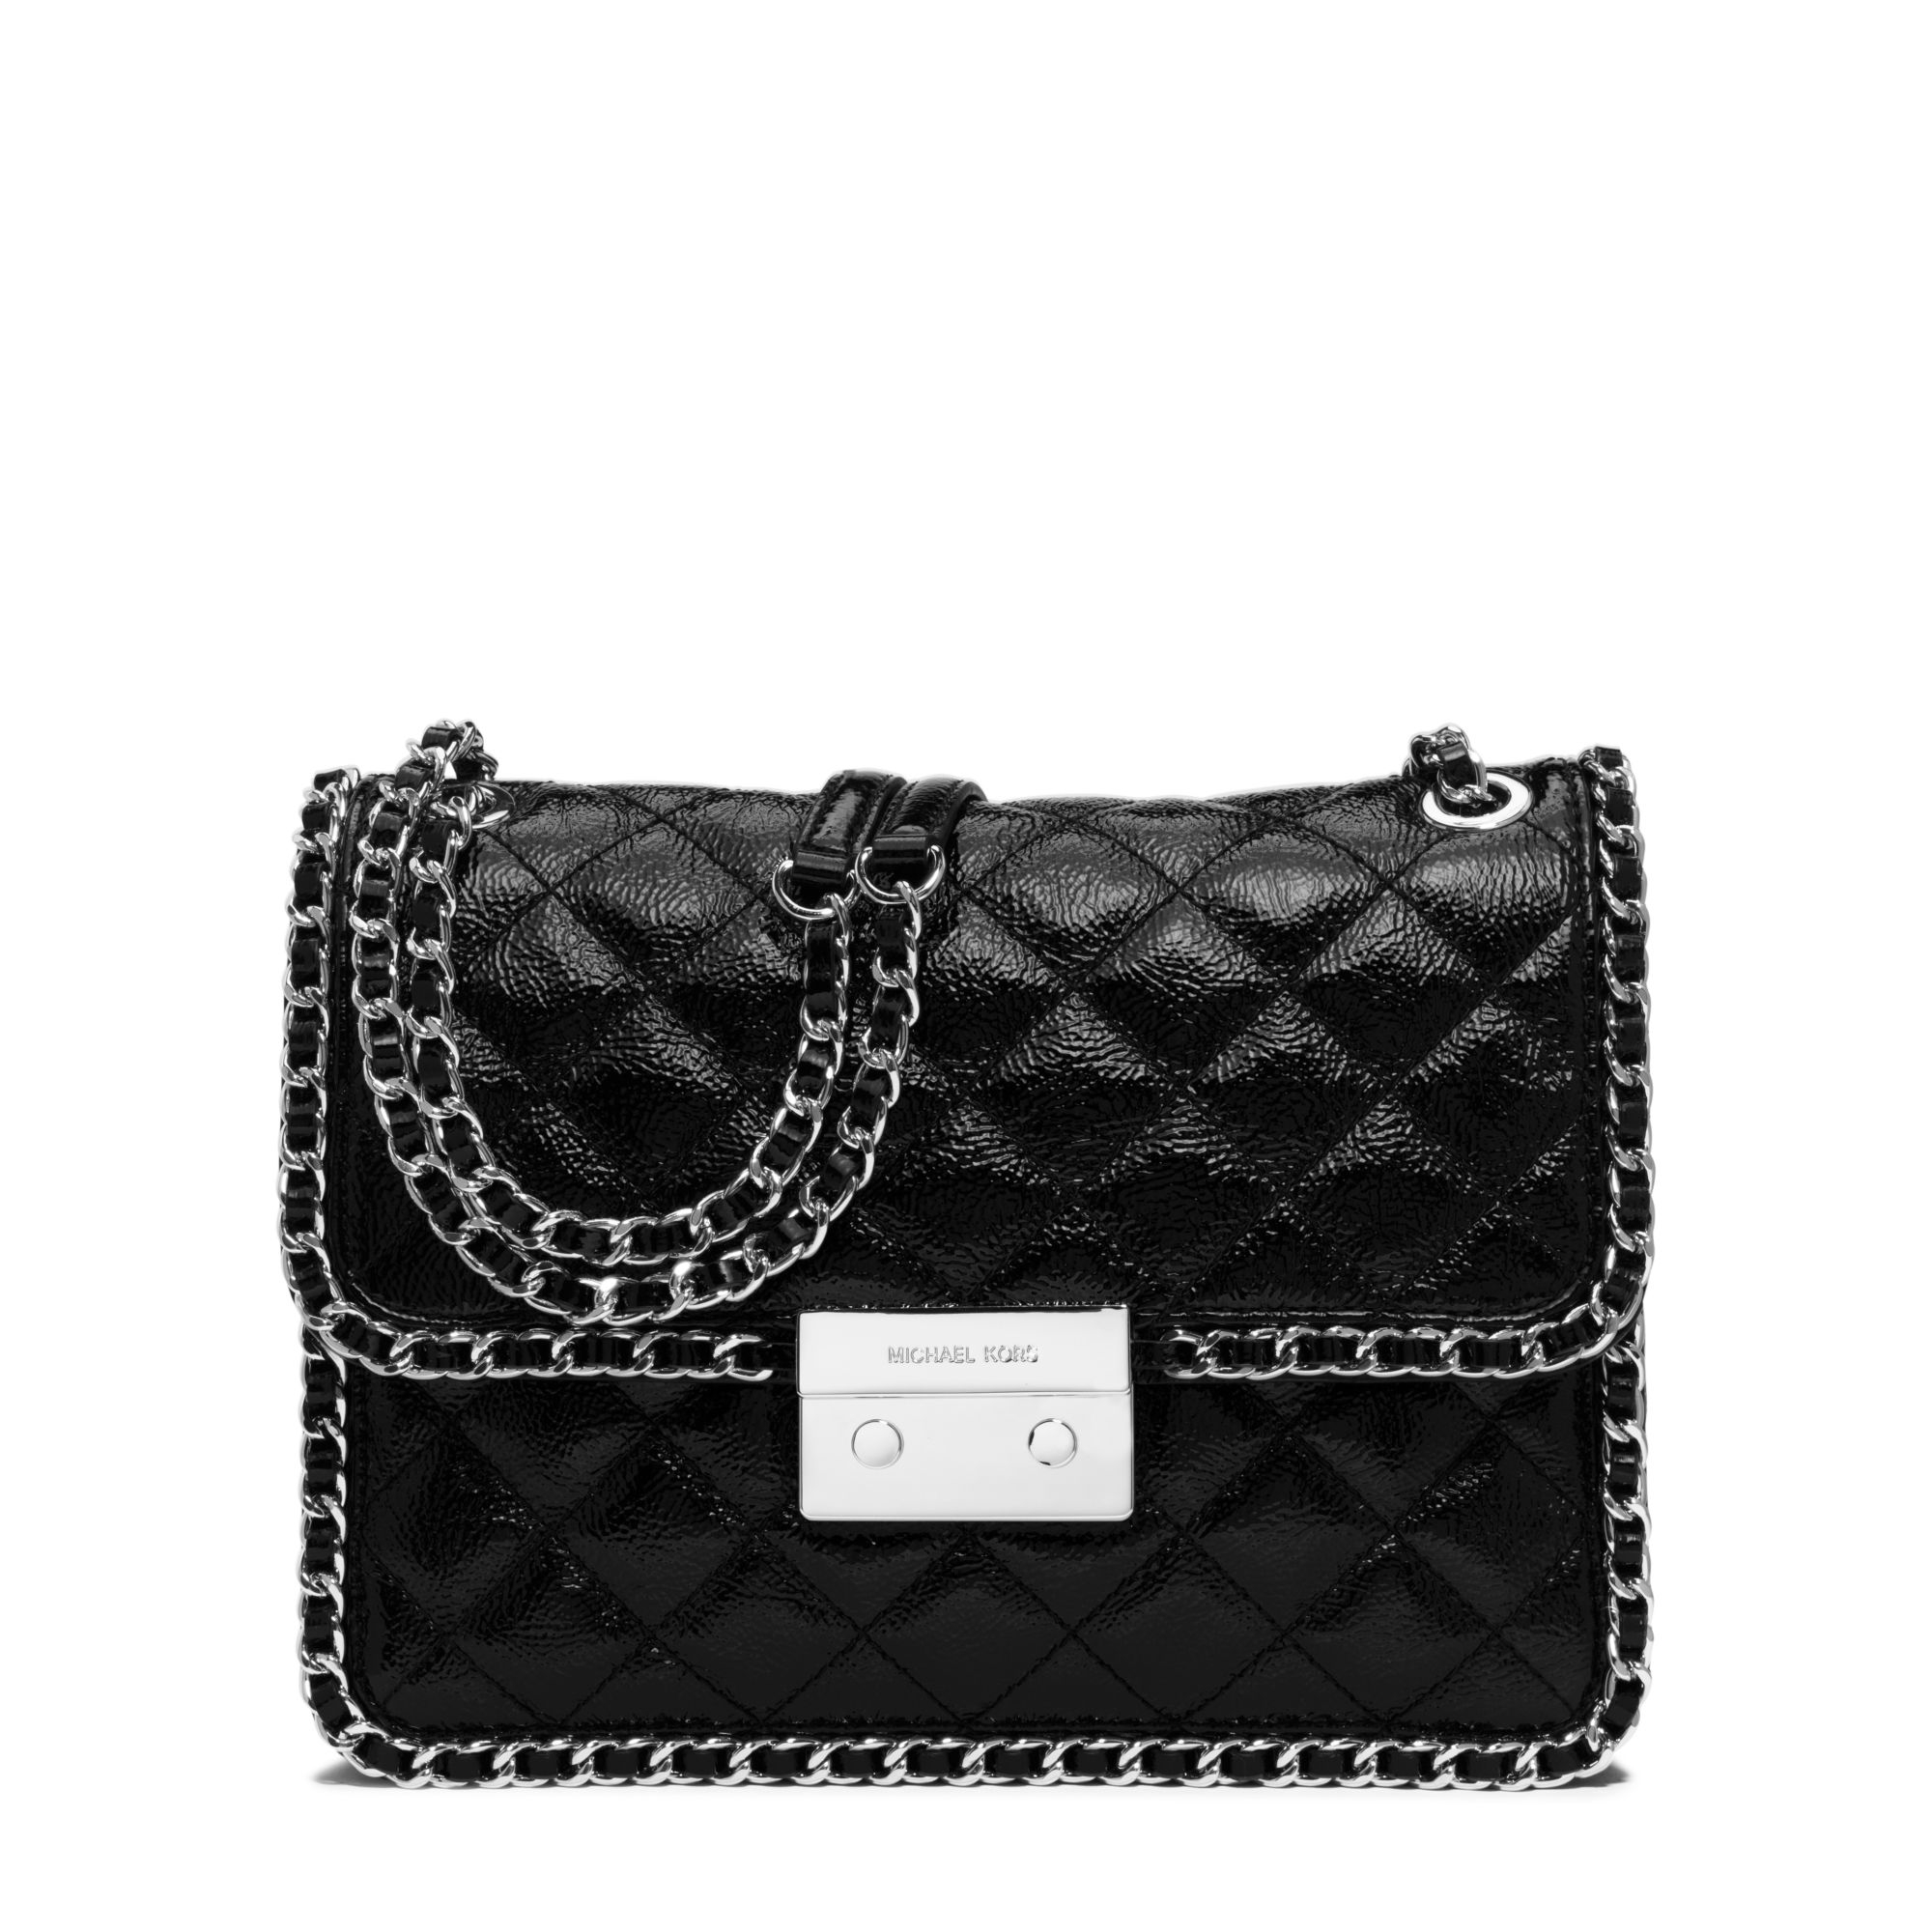 Lyst - Michael Kors Carine Large Quilted Patent-leather Shoulder Bag in Black